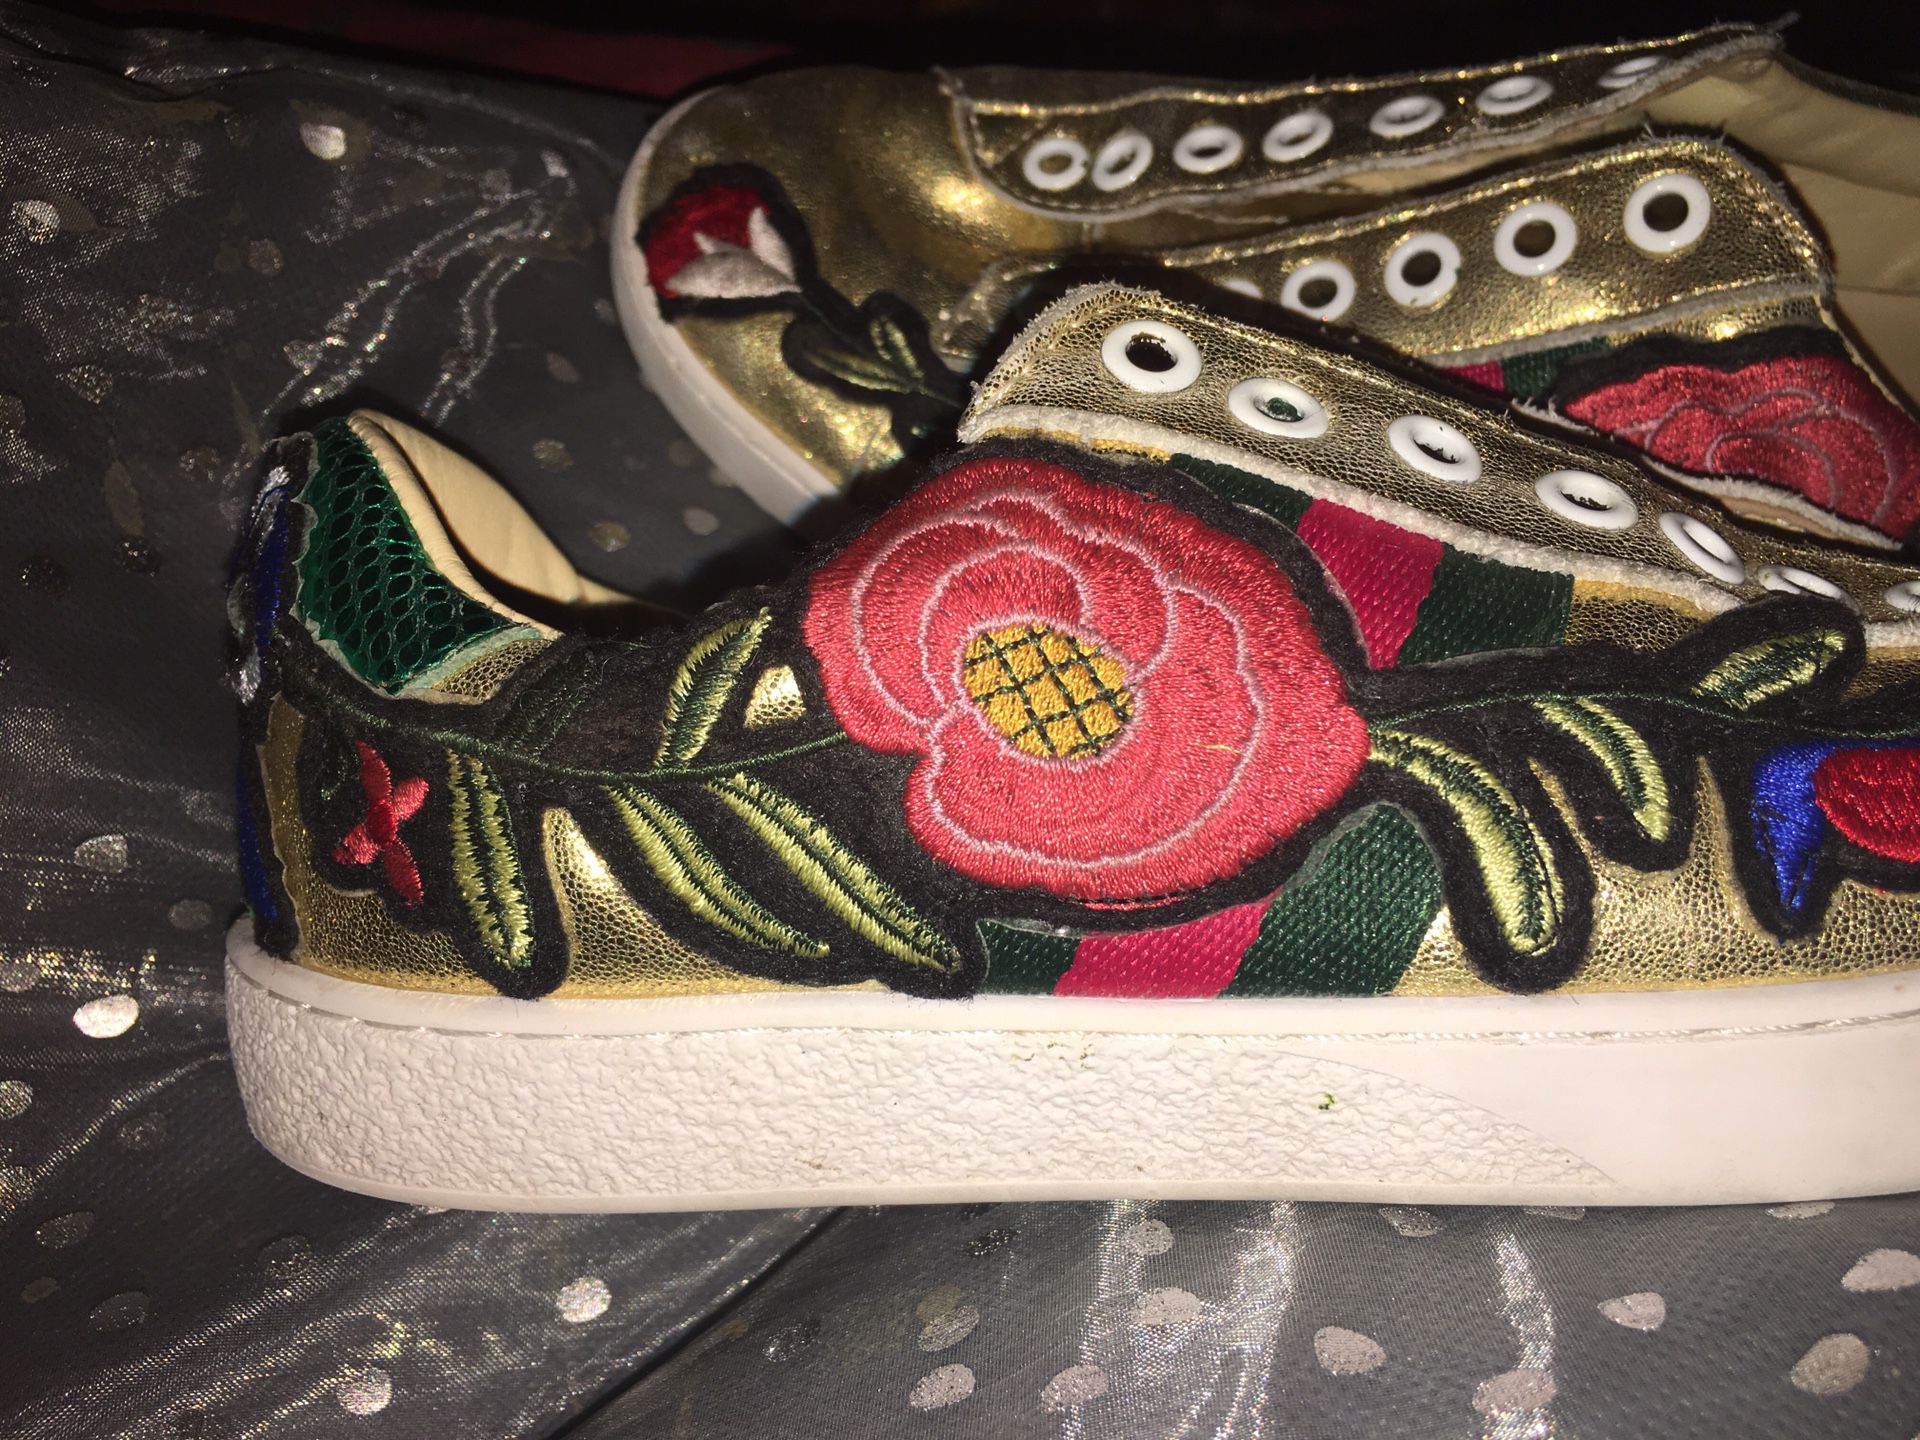 Gucci sneakers - size 6.5 excellent condition